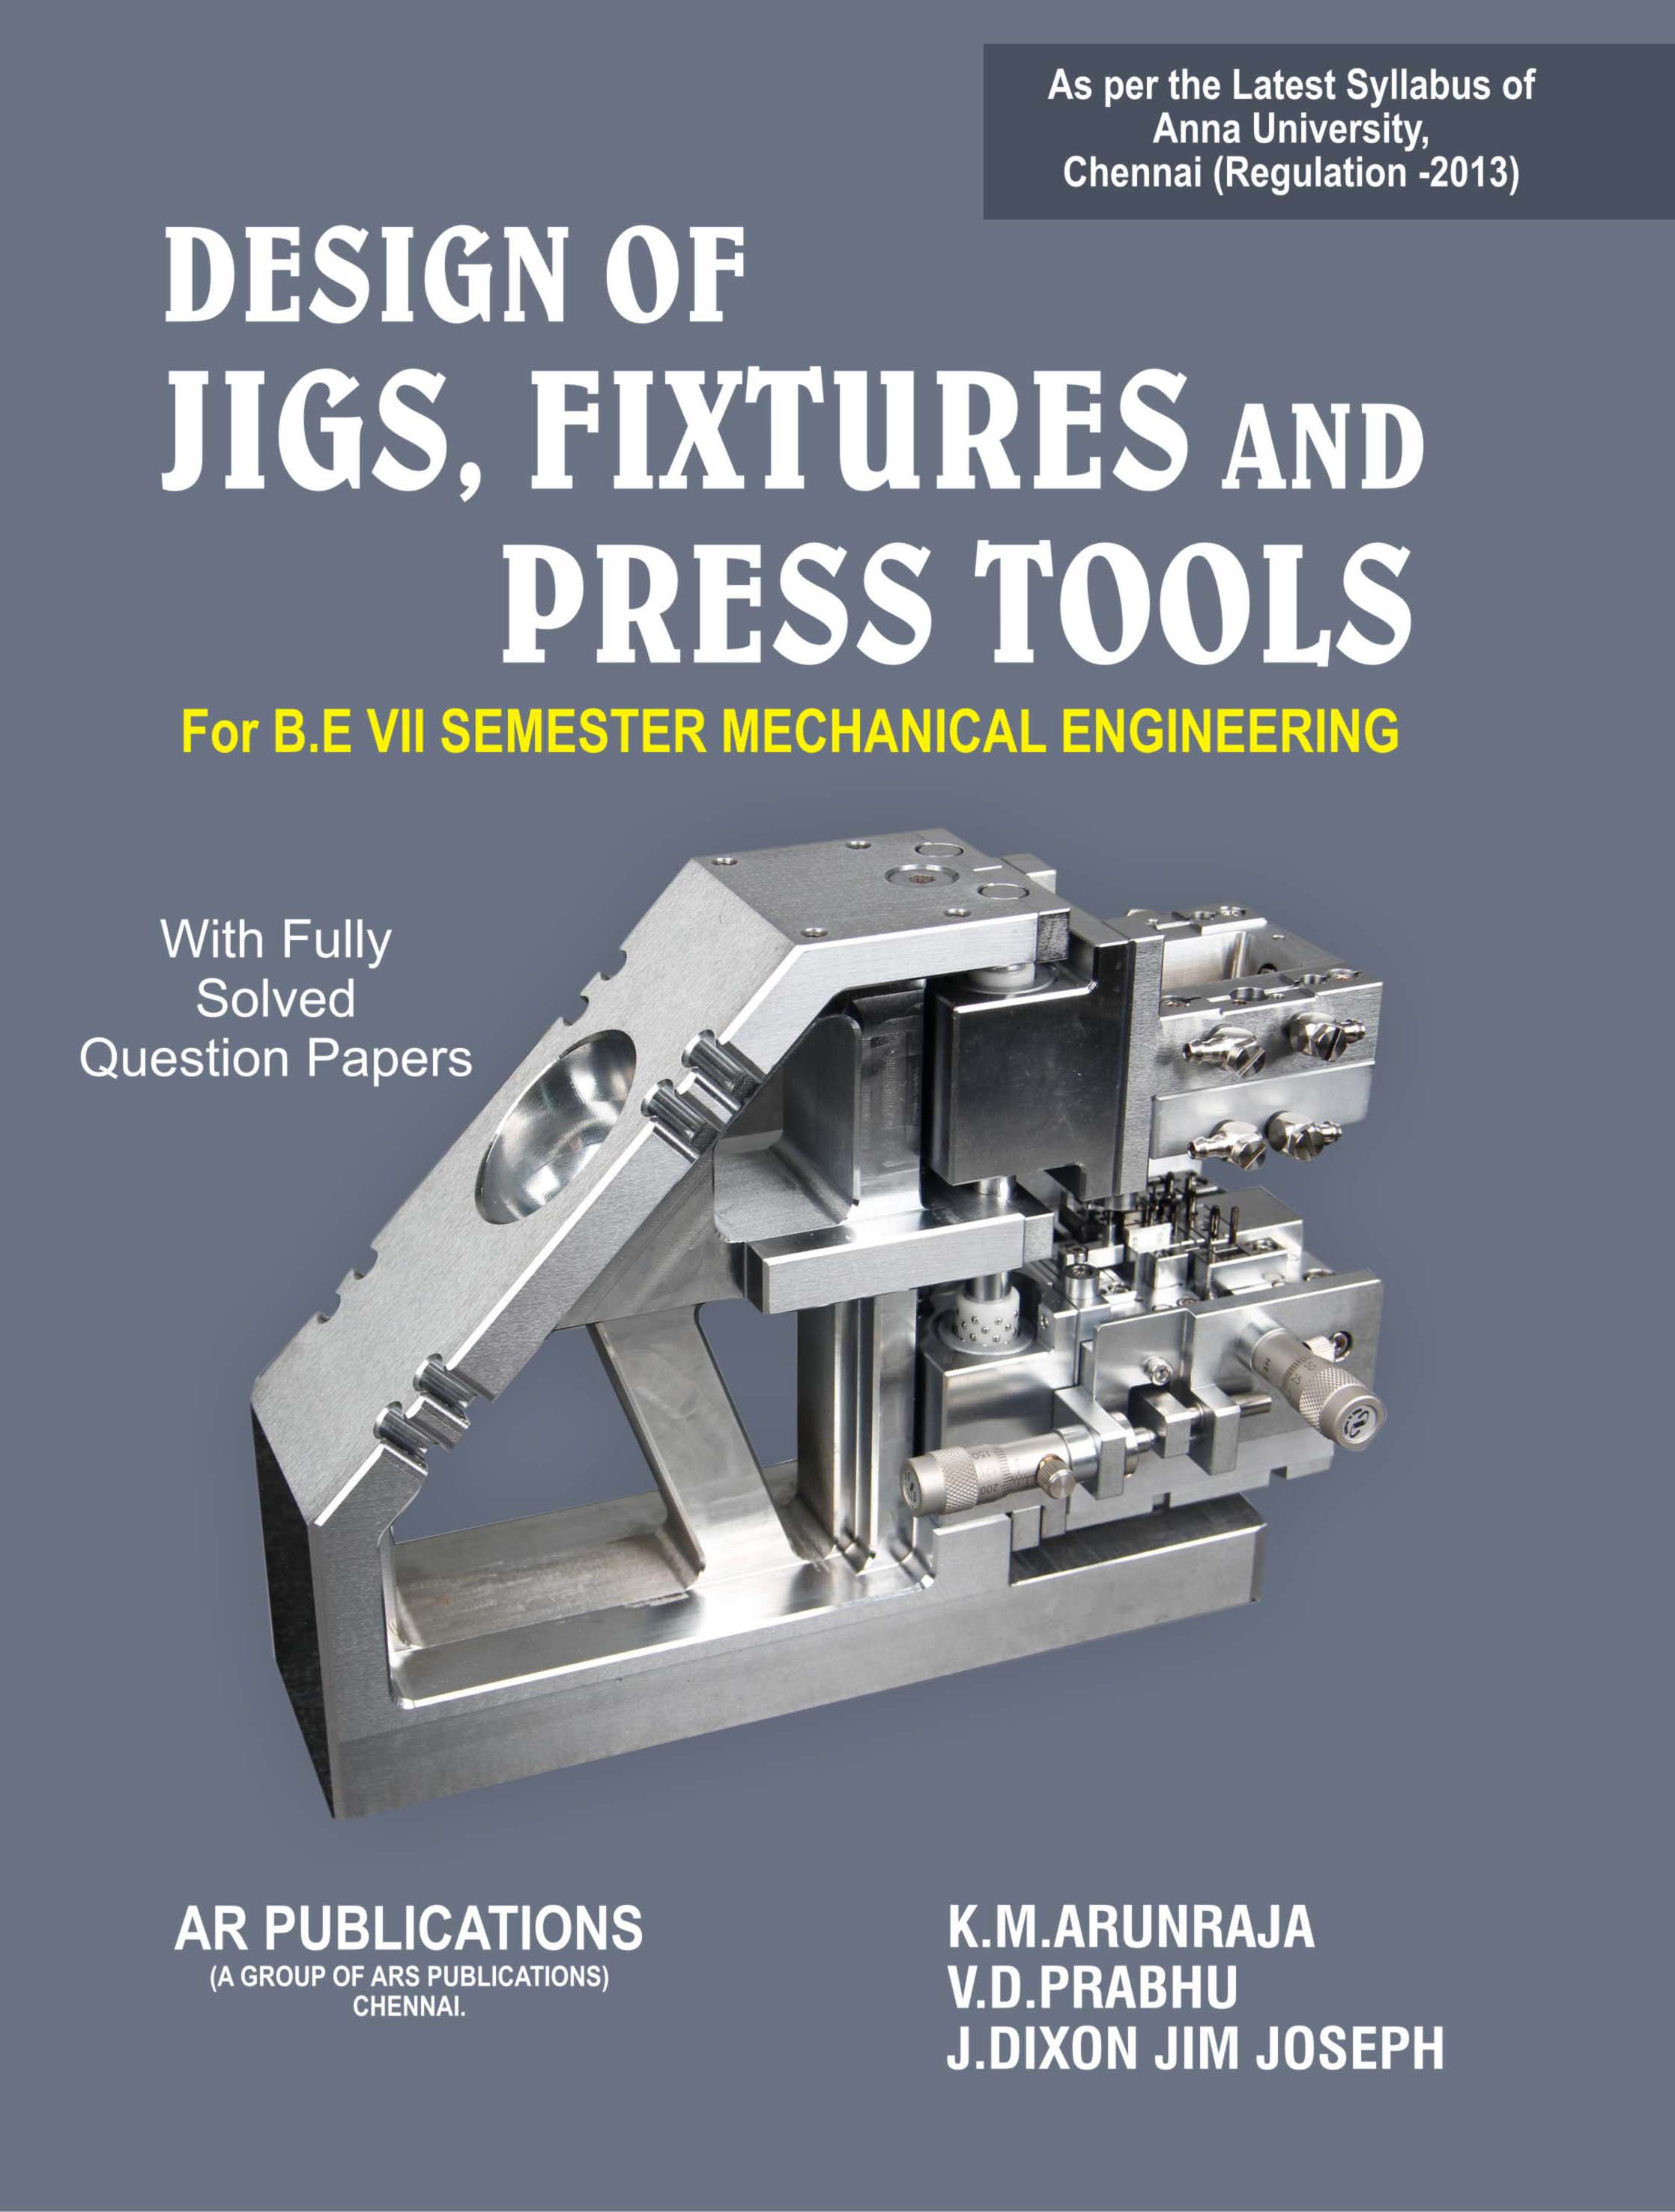 Design of Jigs, Fixtures And Press Toola - ARS Publications